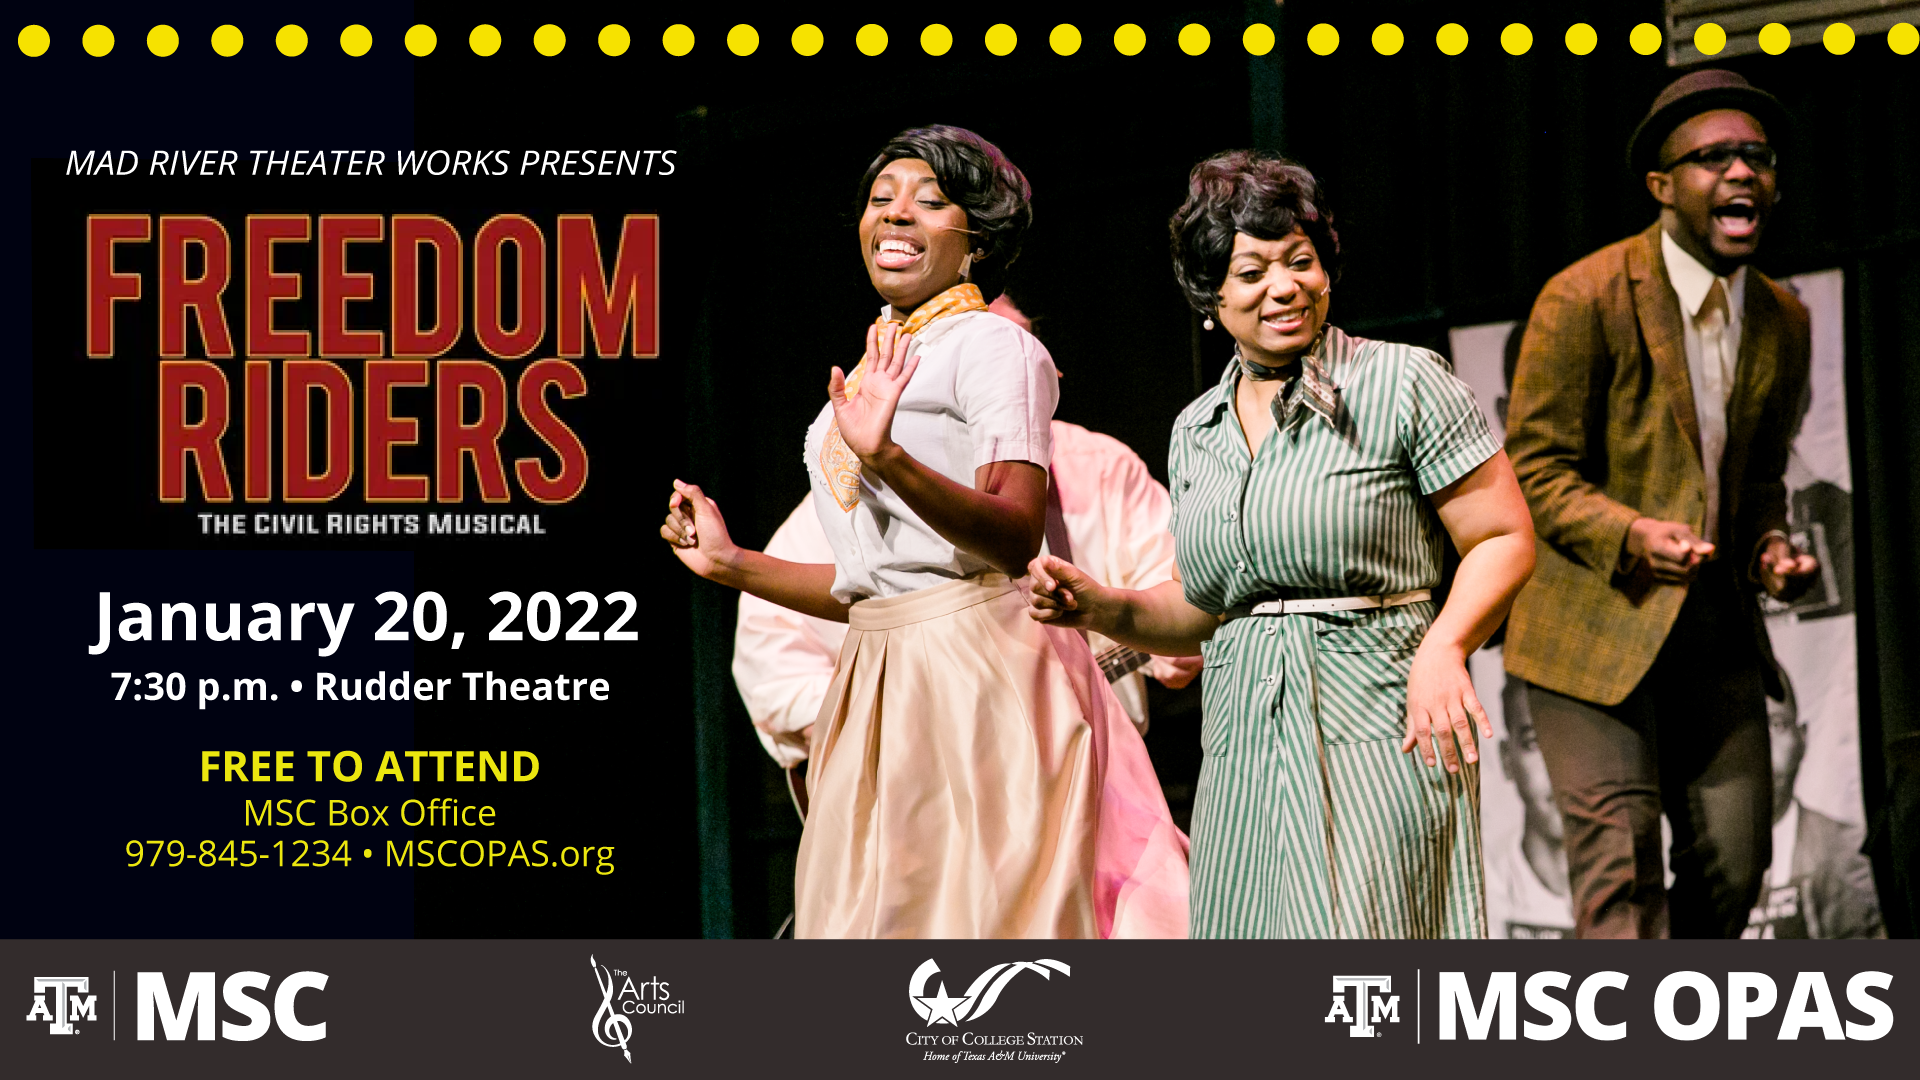 Mad River Theater Works Presents Freedom Rivers, The Civil Rights Musical. January 20, 2022 at 7:30 p.m. at the Rudder Theatre. Free to Attend. Free Tickets at the MSC Box Office: 979.845.1234, and MSCOPAS.org